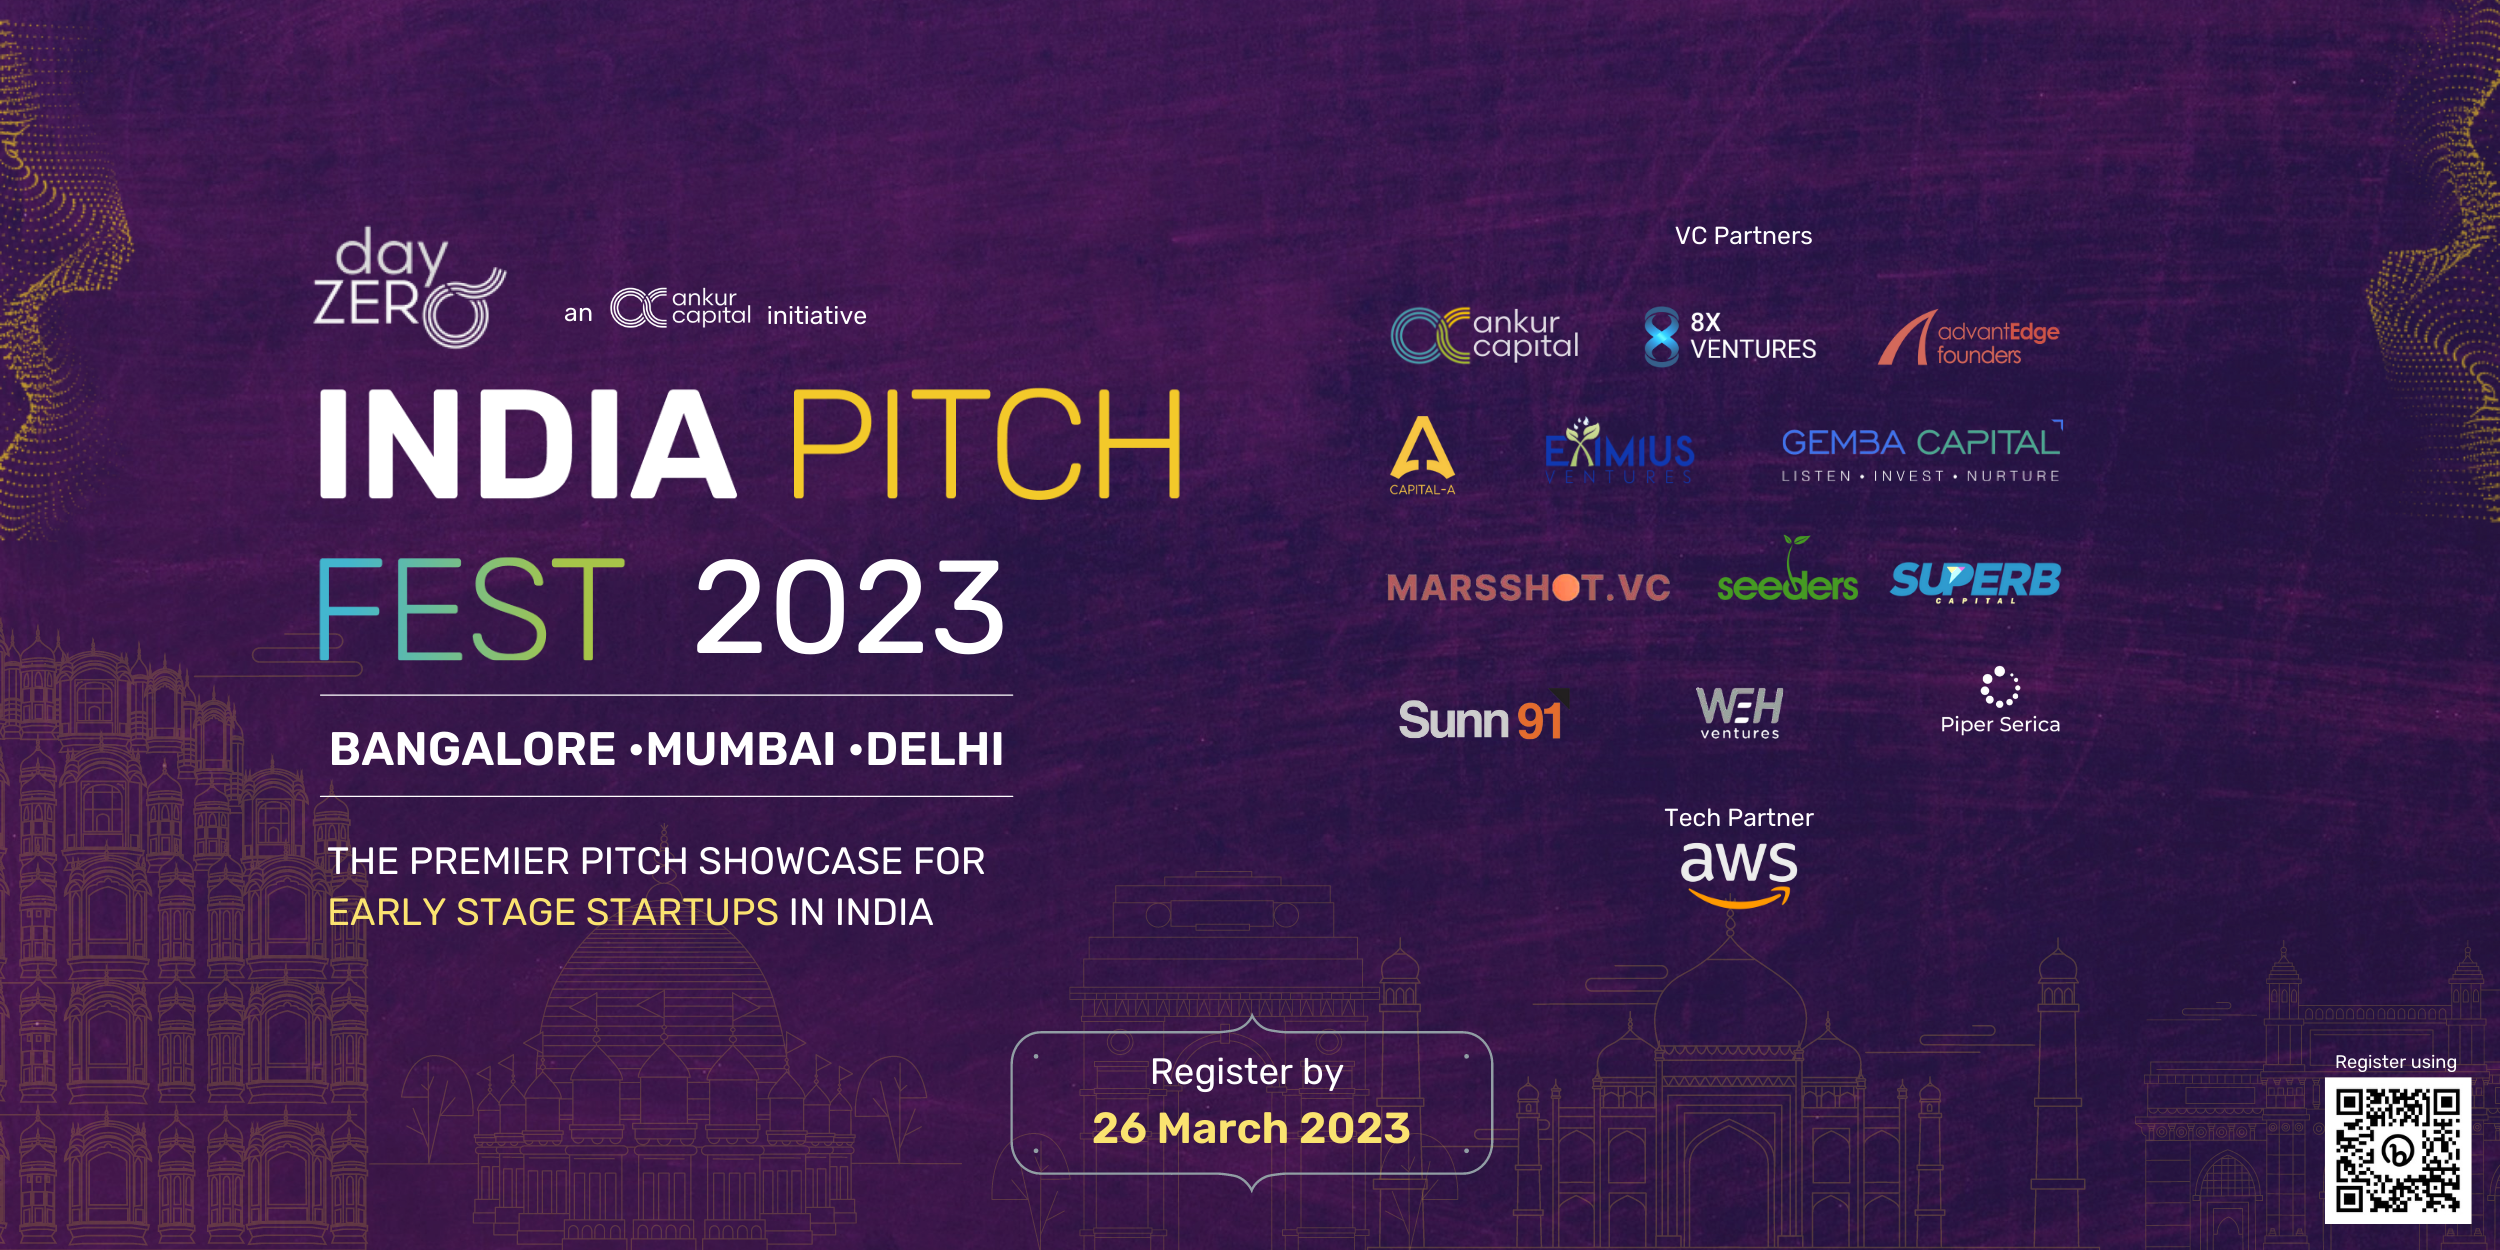 India Pitch Fest 2023 aims to empower pre-seed and seed-stage startups

